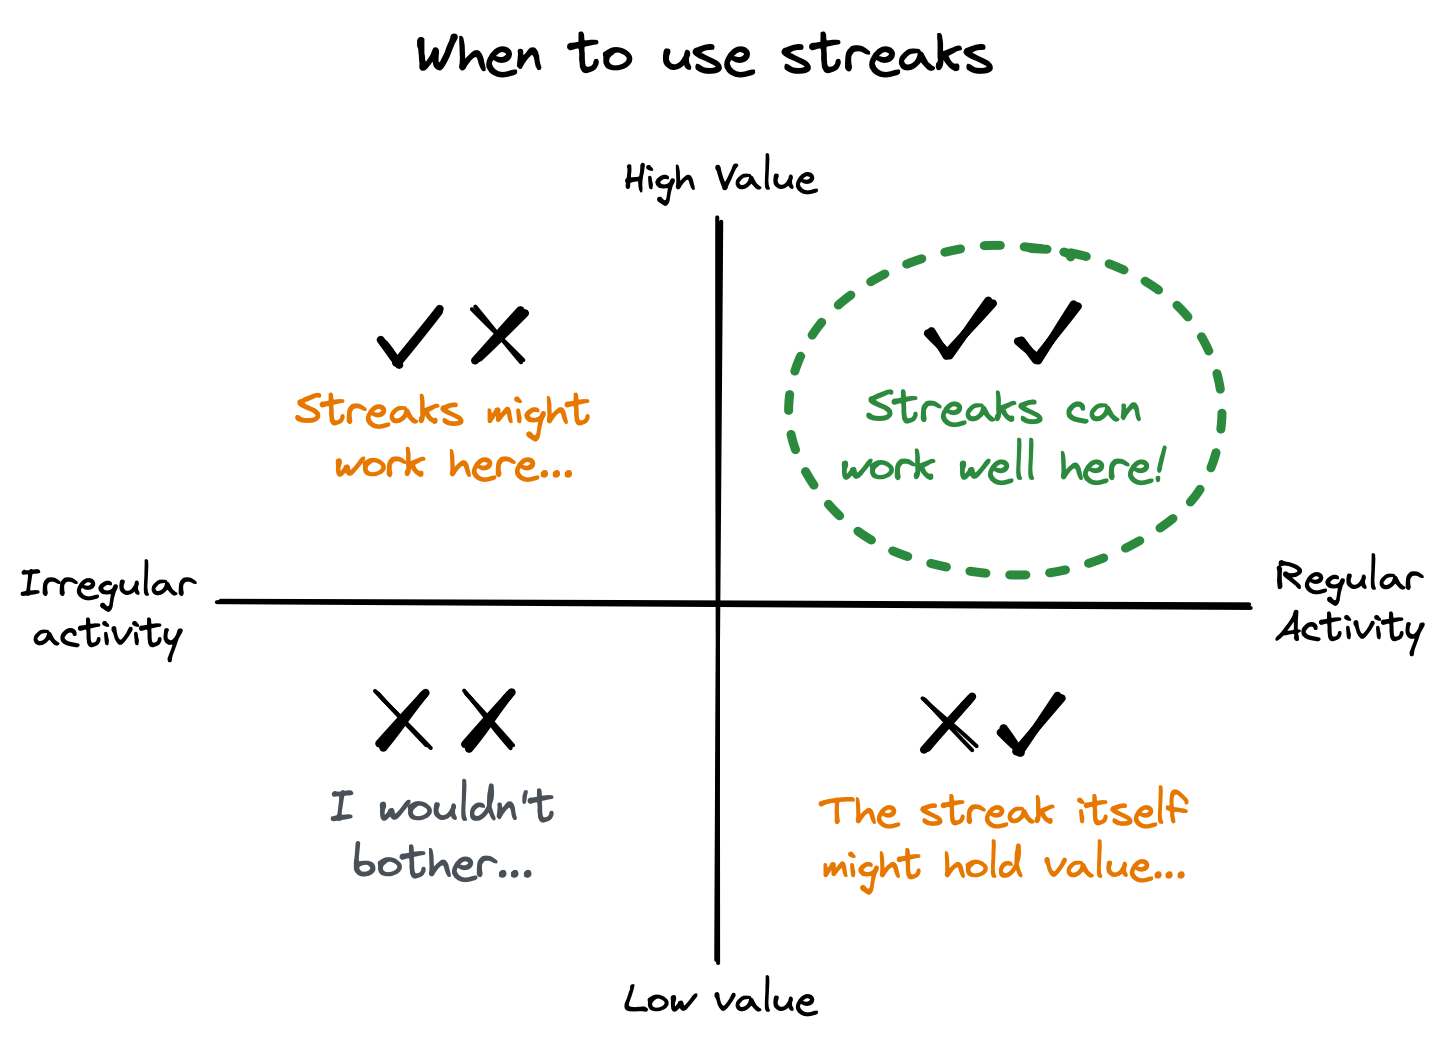 When to use streaks - when there is both value and a regular activity